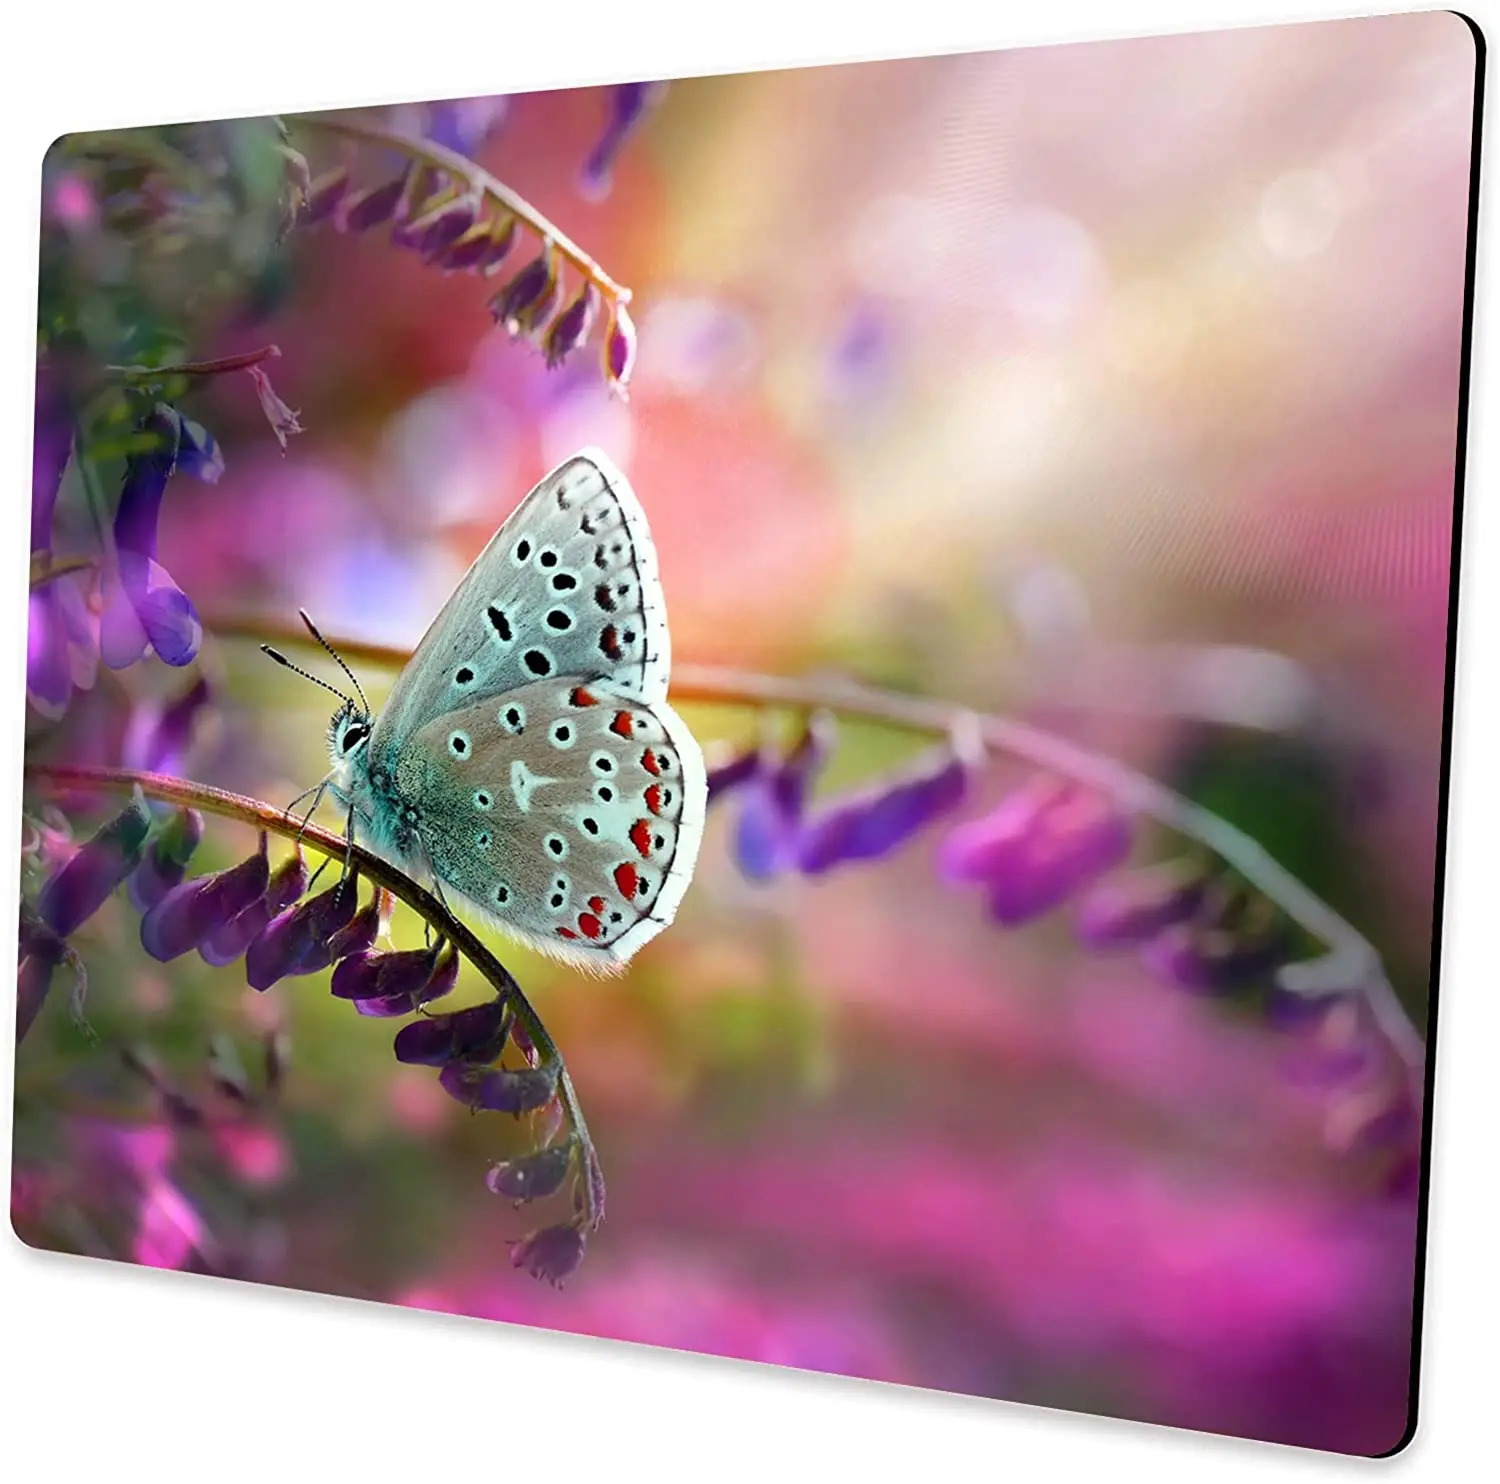 

Colorful Butterfly Mouse Pad Unique Design Anti-Slip Rubber Base Mouse Pad for Desktop Computer and Laptop Mouse Pad 9.5X7.9Inch